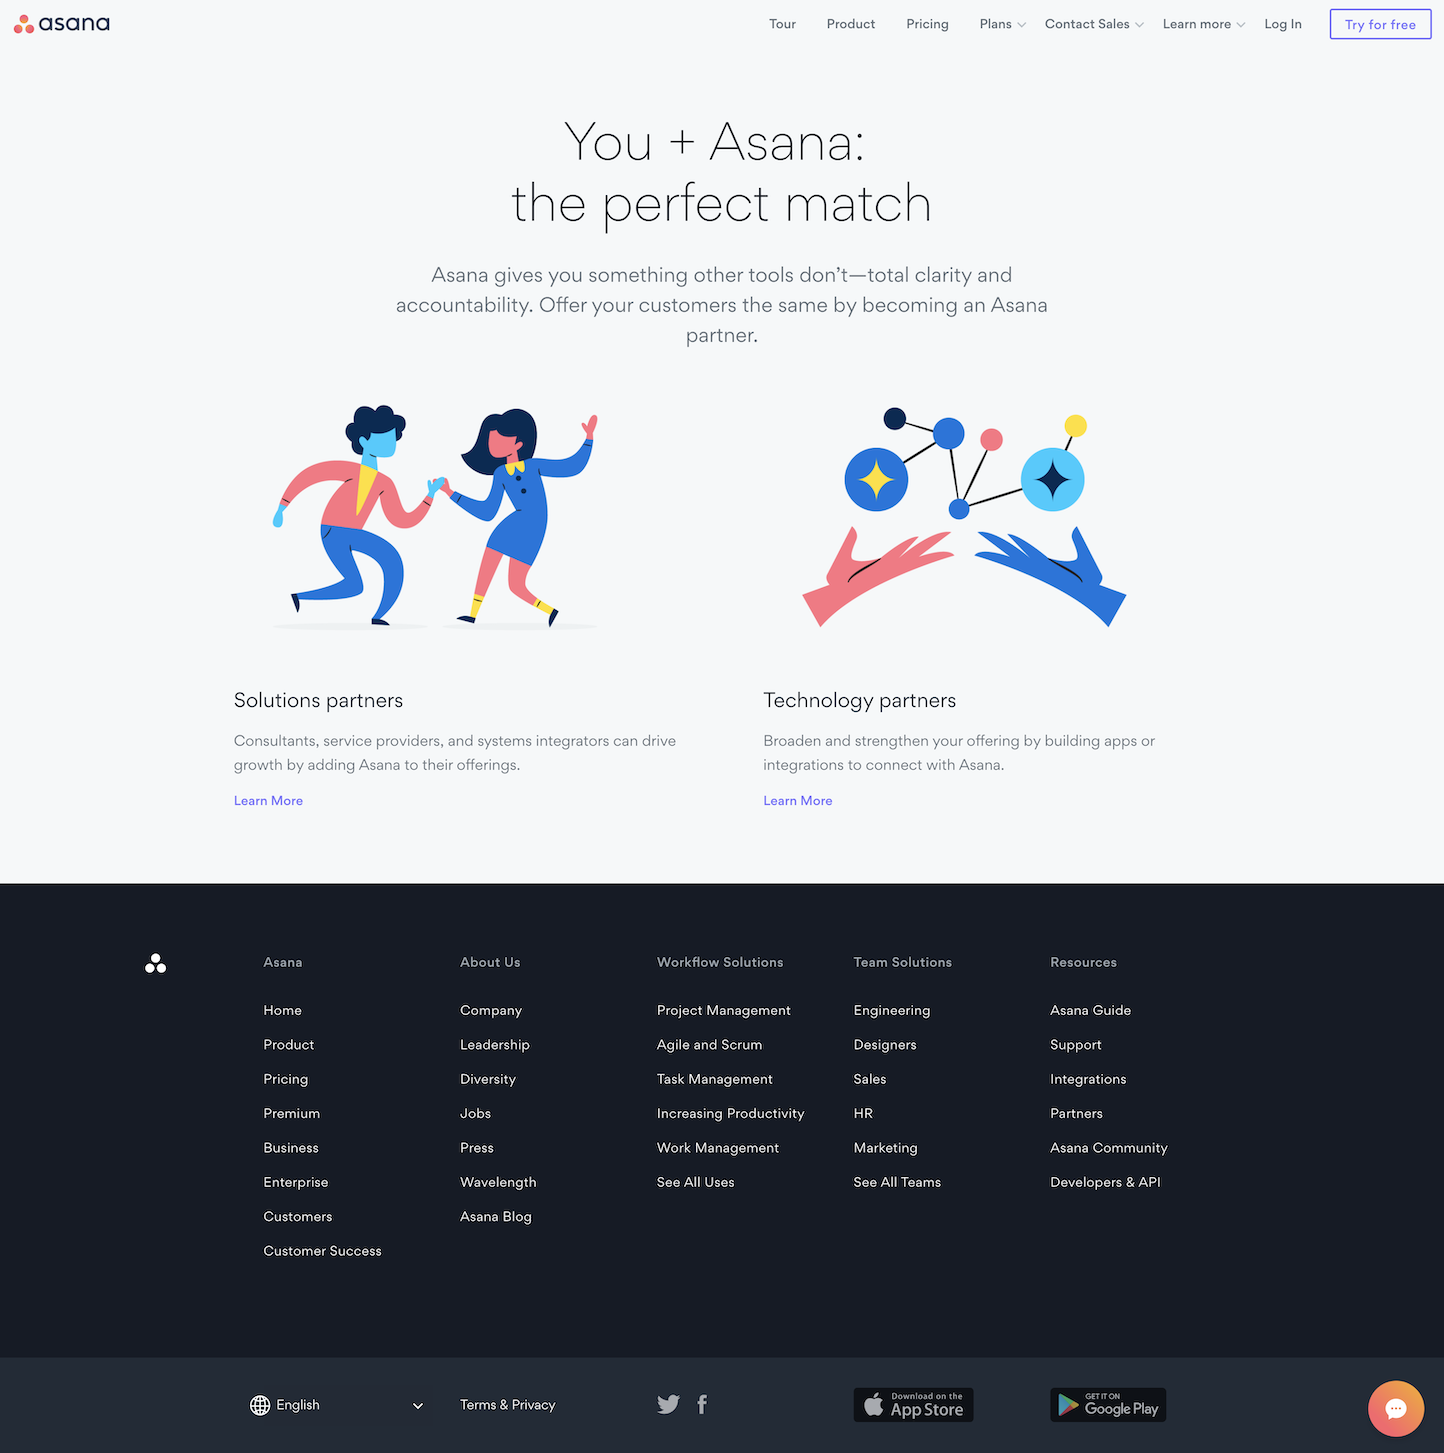 Screenshot of the Partners page from the Asana website.